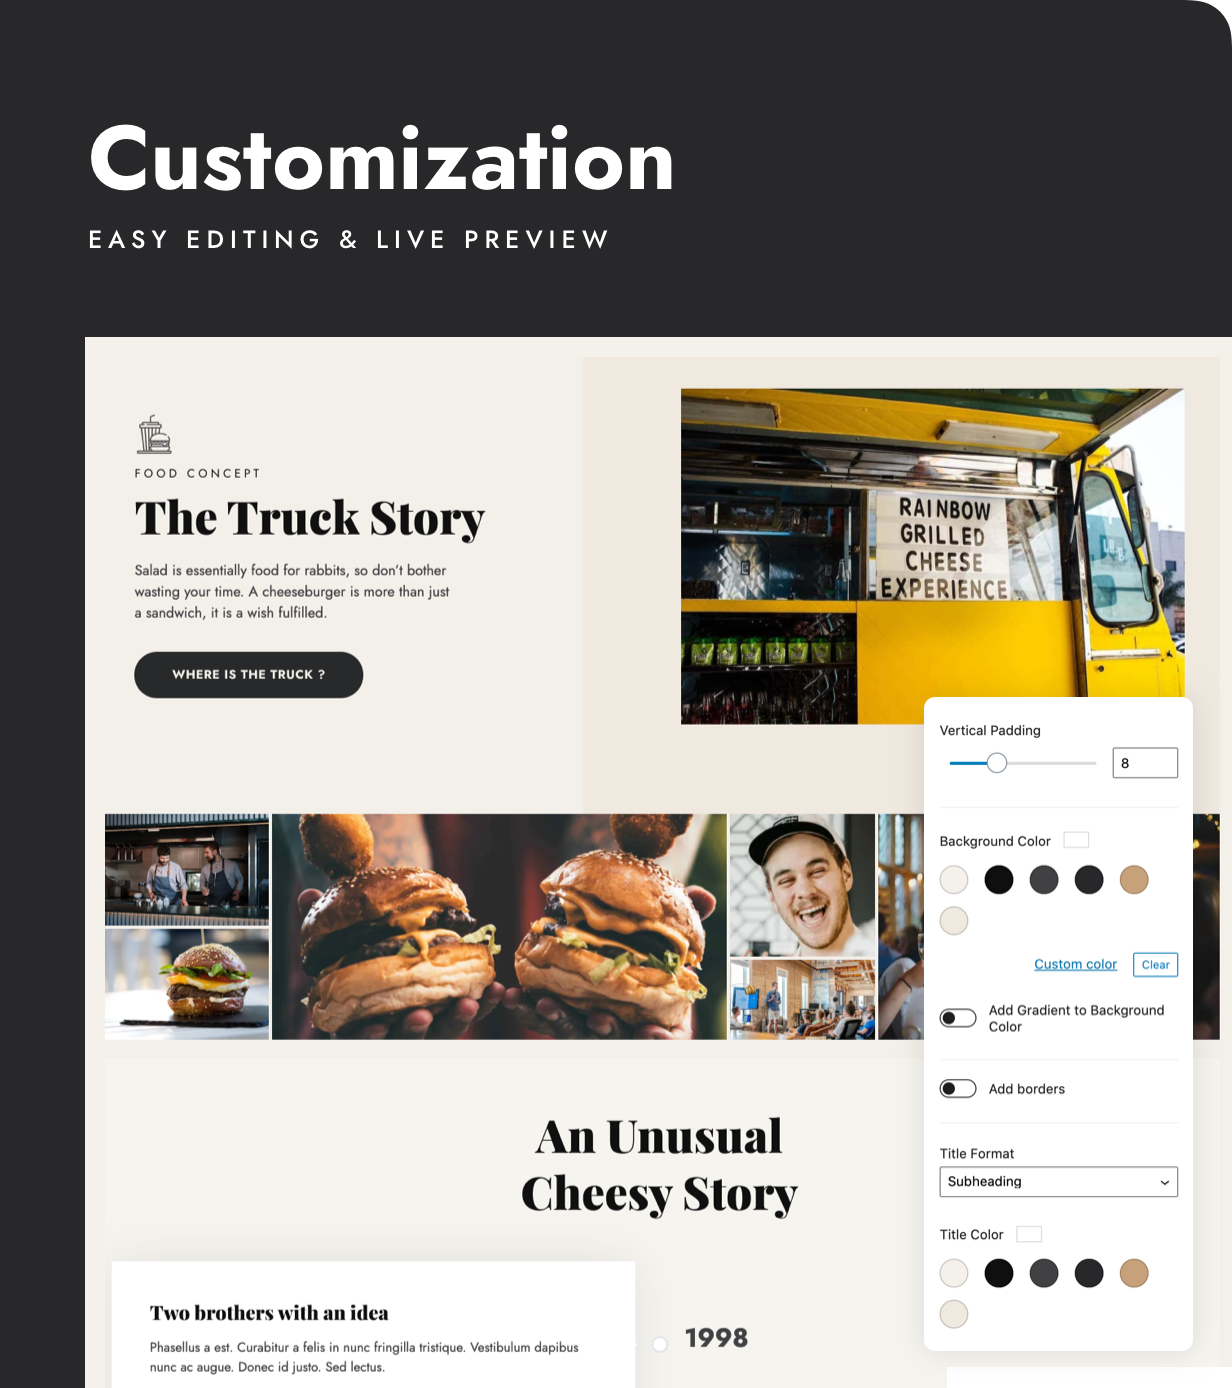 Customization with page modifications.